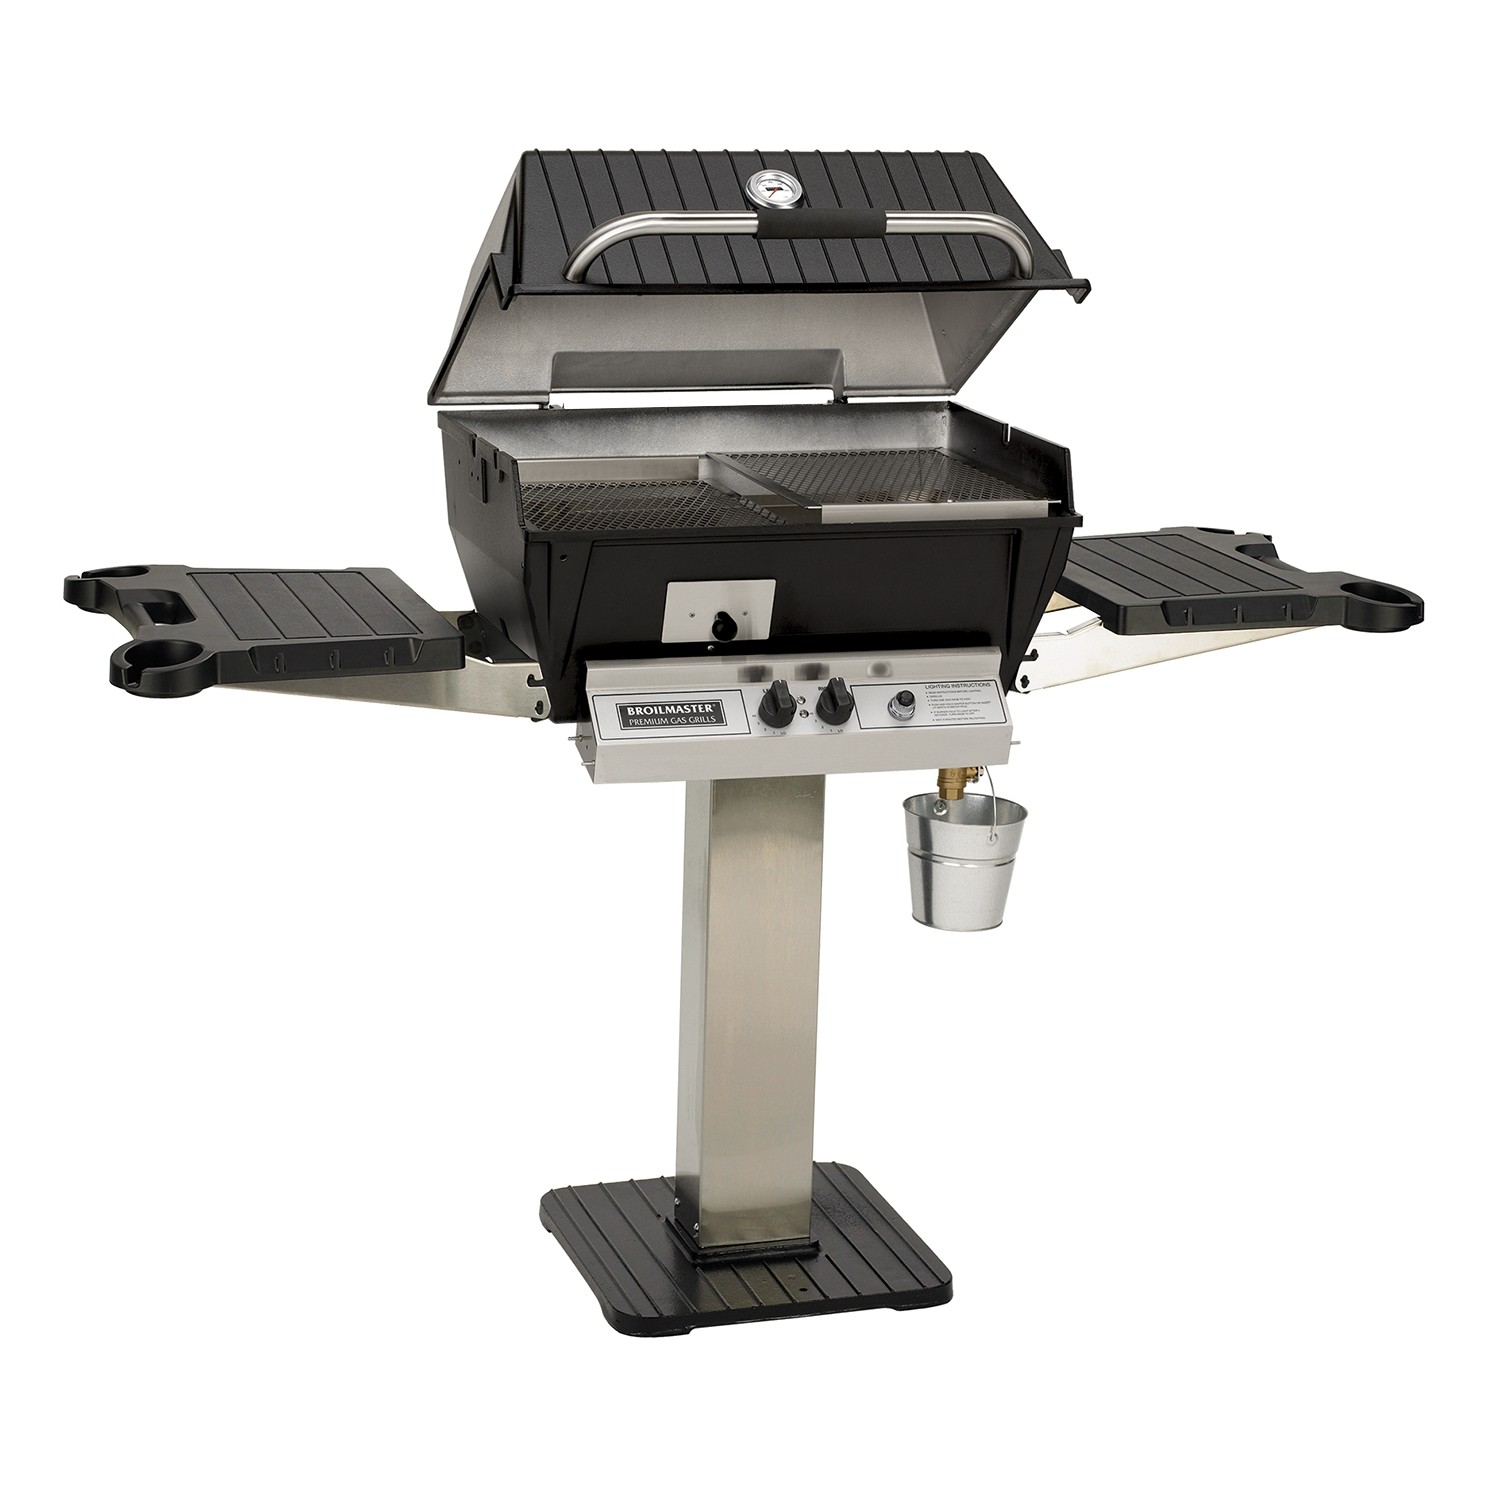 BROILMASTER Q3X SLOW COOKER SERIES PROPANE GAS GRILL - BLACK